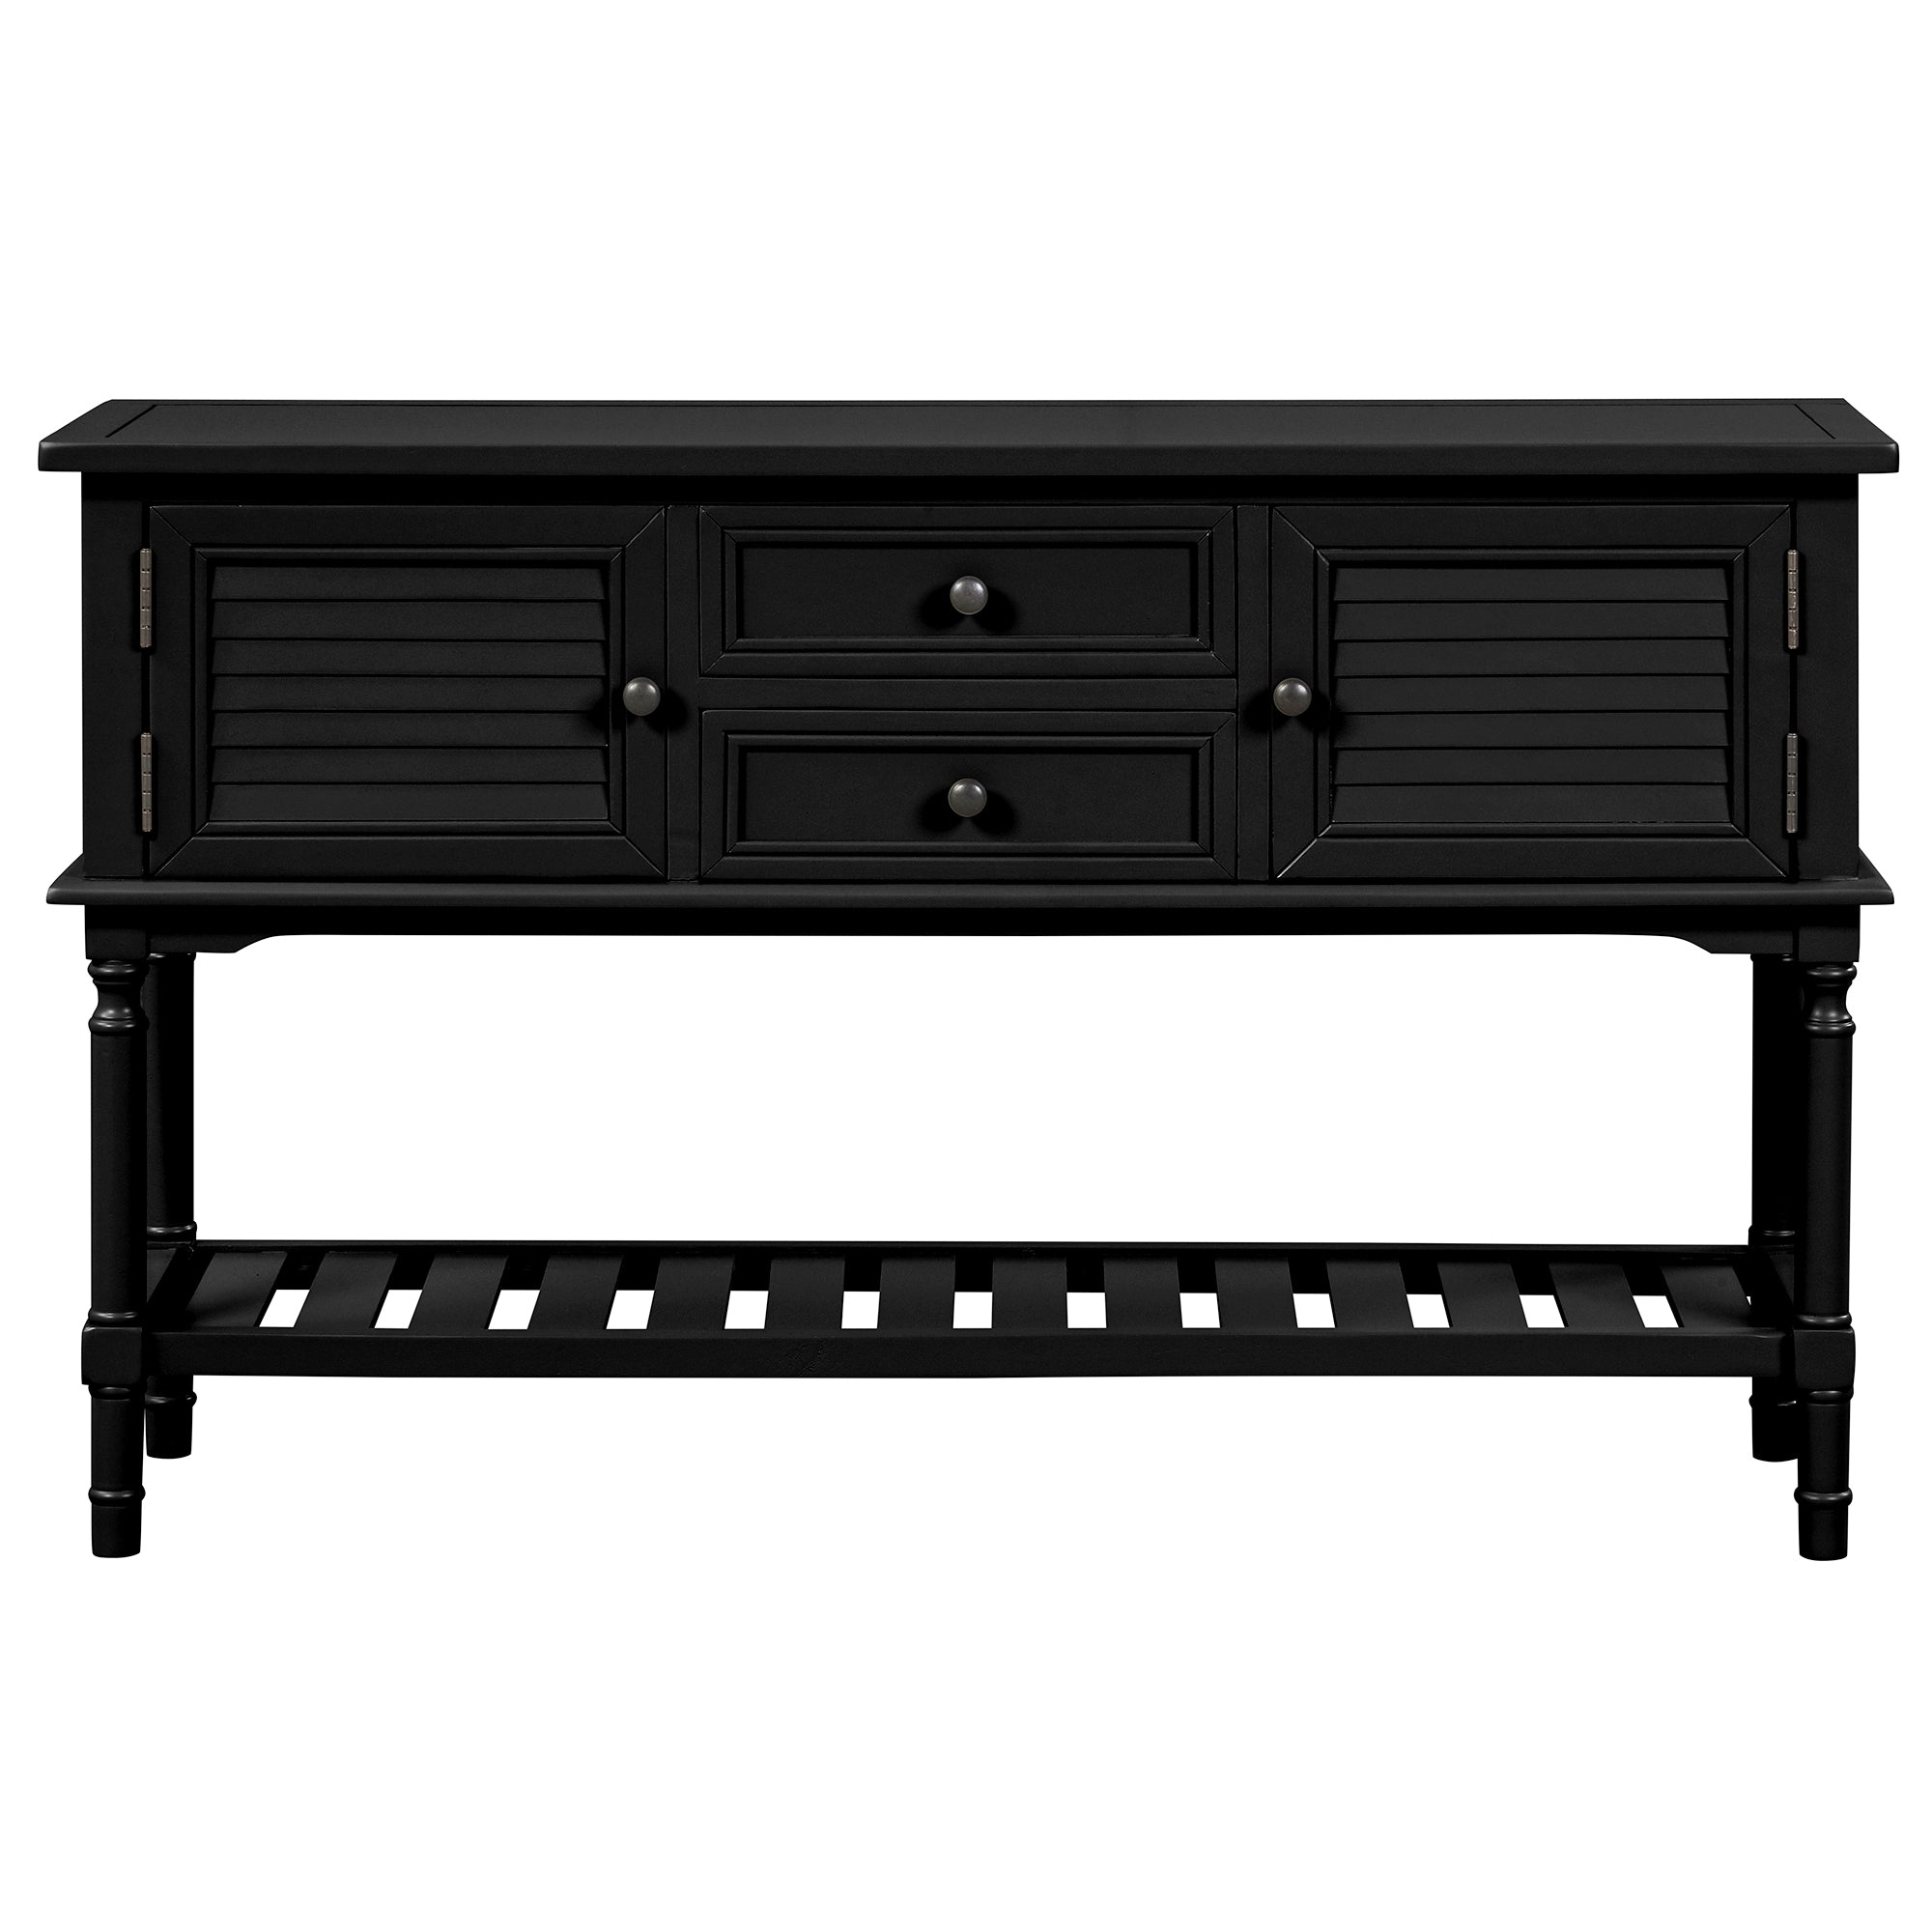 47" Modern Console Table Sofa Table for Living Room with 2 Drawers, 2 Cabinets and 1 Shelf